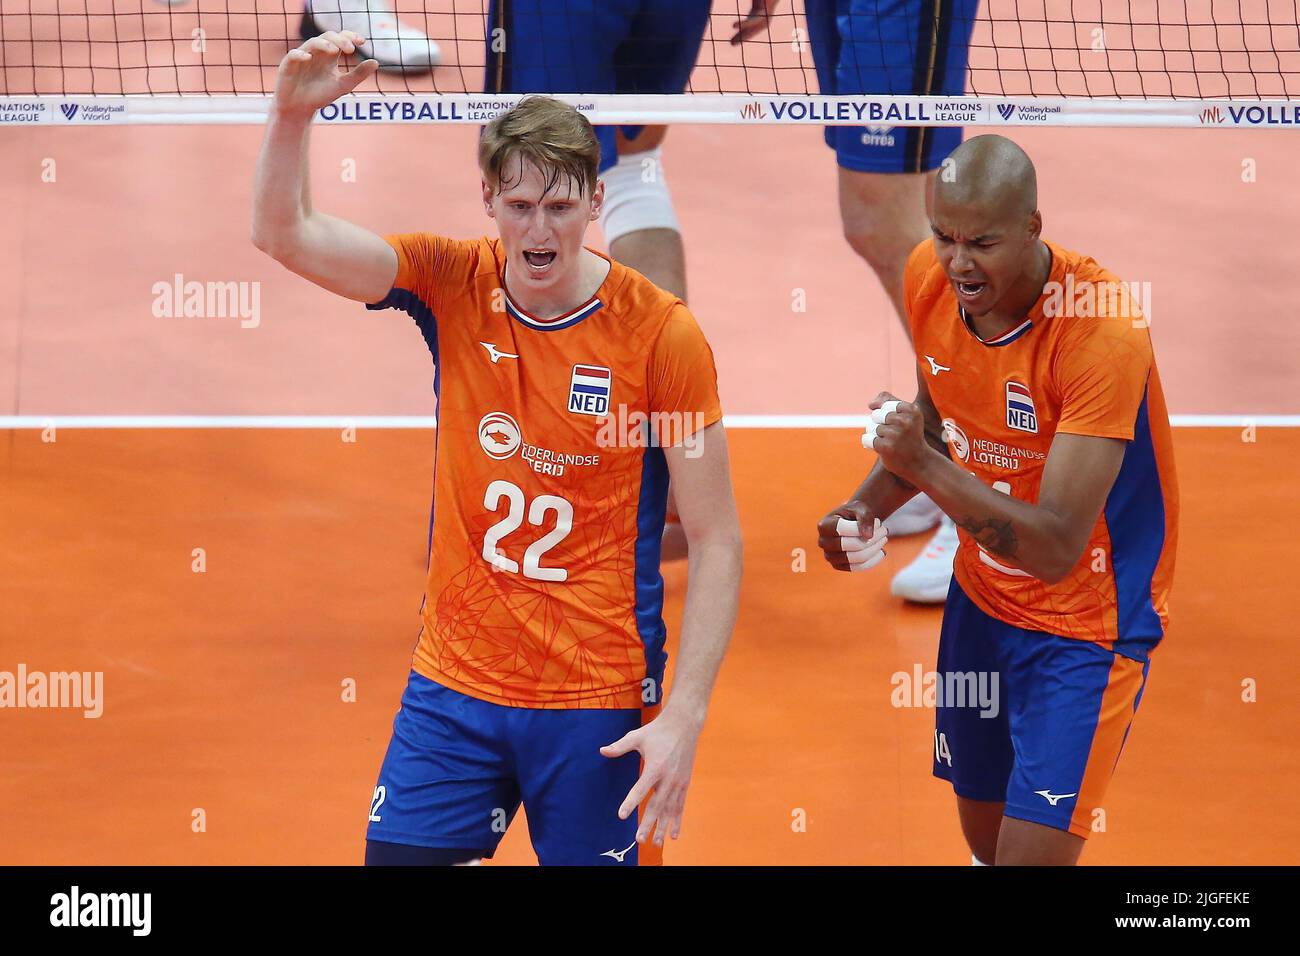 Gdansk, Poland. 10th July, 2022. Twan Wiltenburg (L) and Nimi Abdel Aziz (R) of the Netherlands during the 2022 men's FIVB Volleyball Nations League match between Italy and the Netherlands in Gdansk, Poland, 10 July 2022. Credit: PAP/Alamy Live News Stock Photo